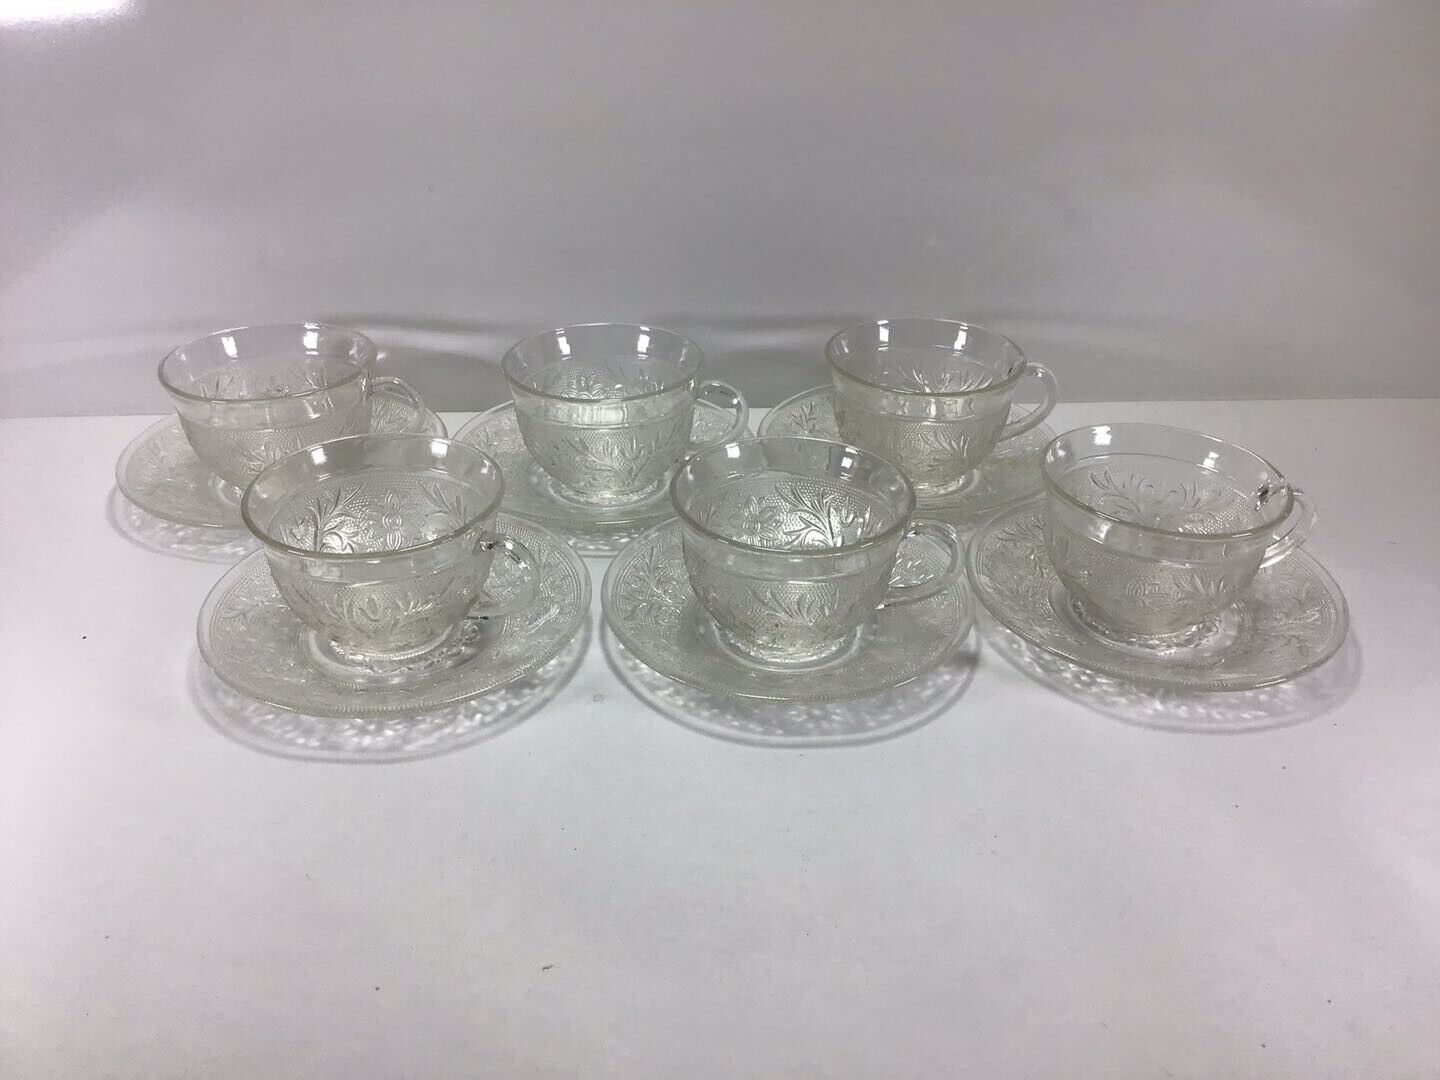 S1 Vintage Anchor Hocking Sandwich Clear Glass Cups & Saucers Set of 6